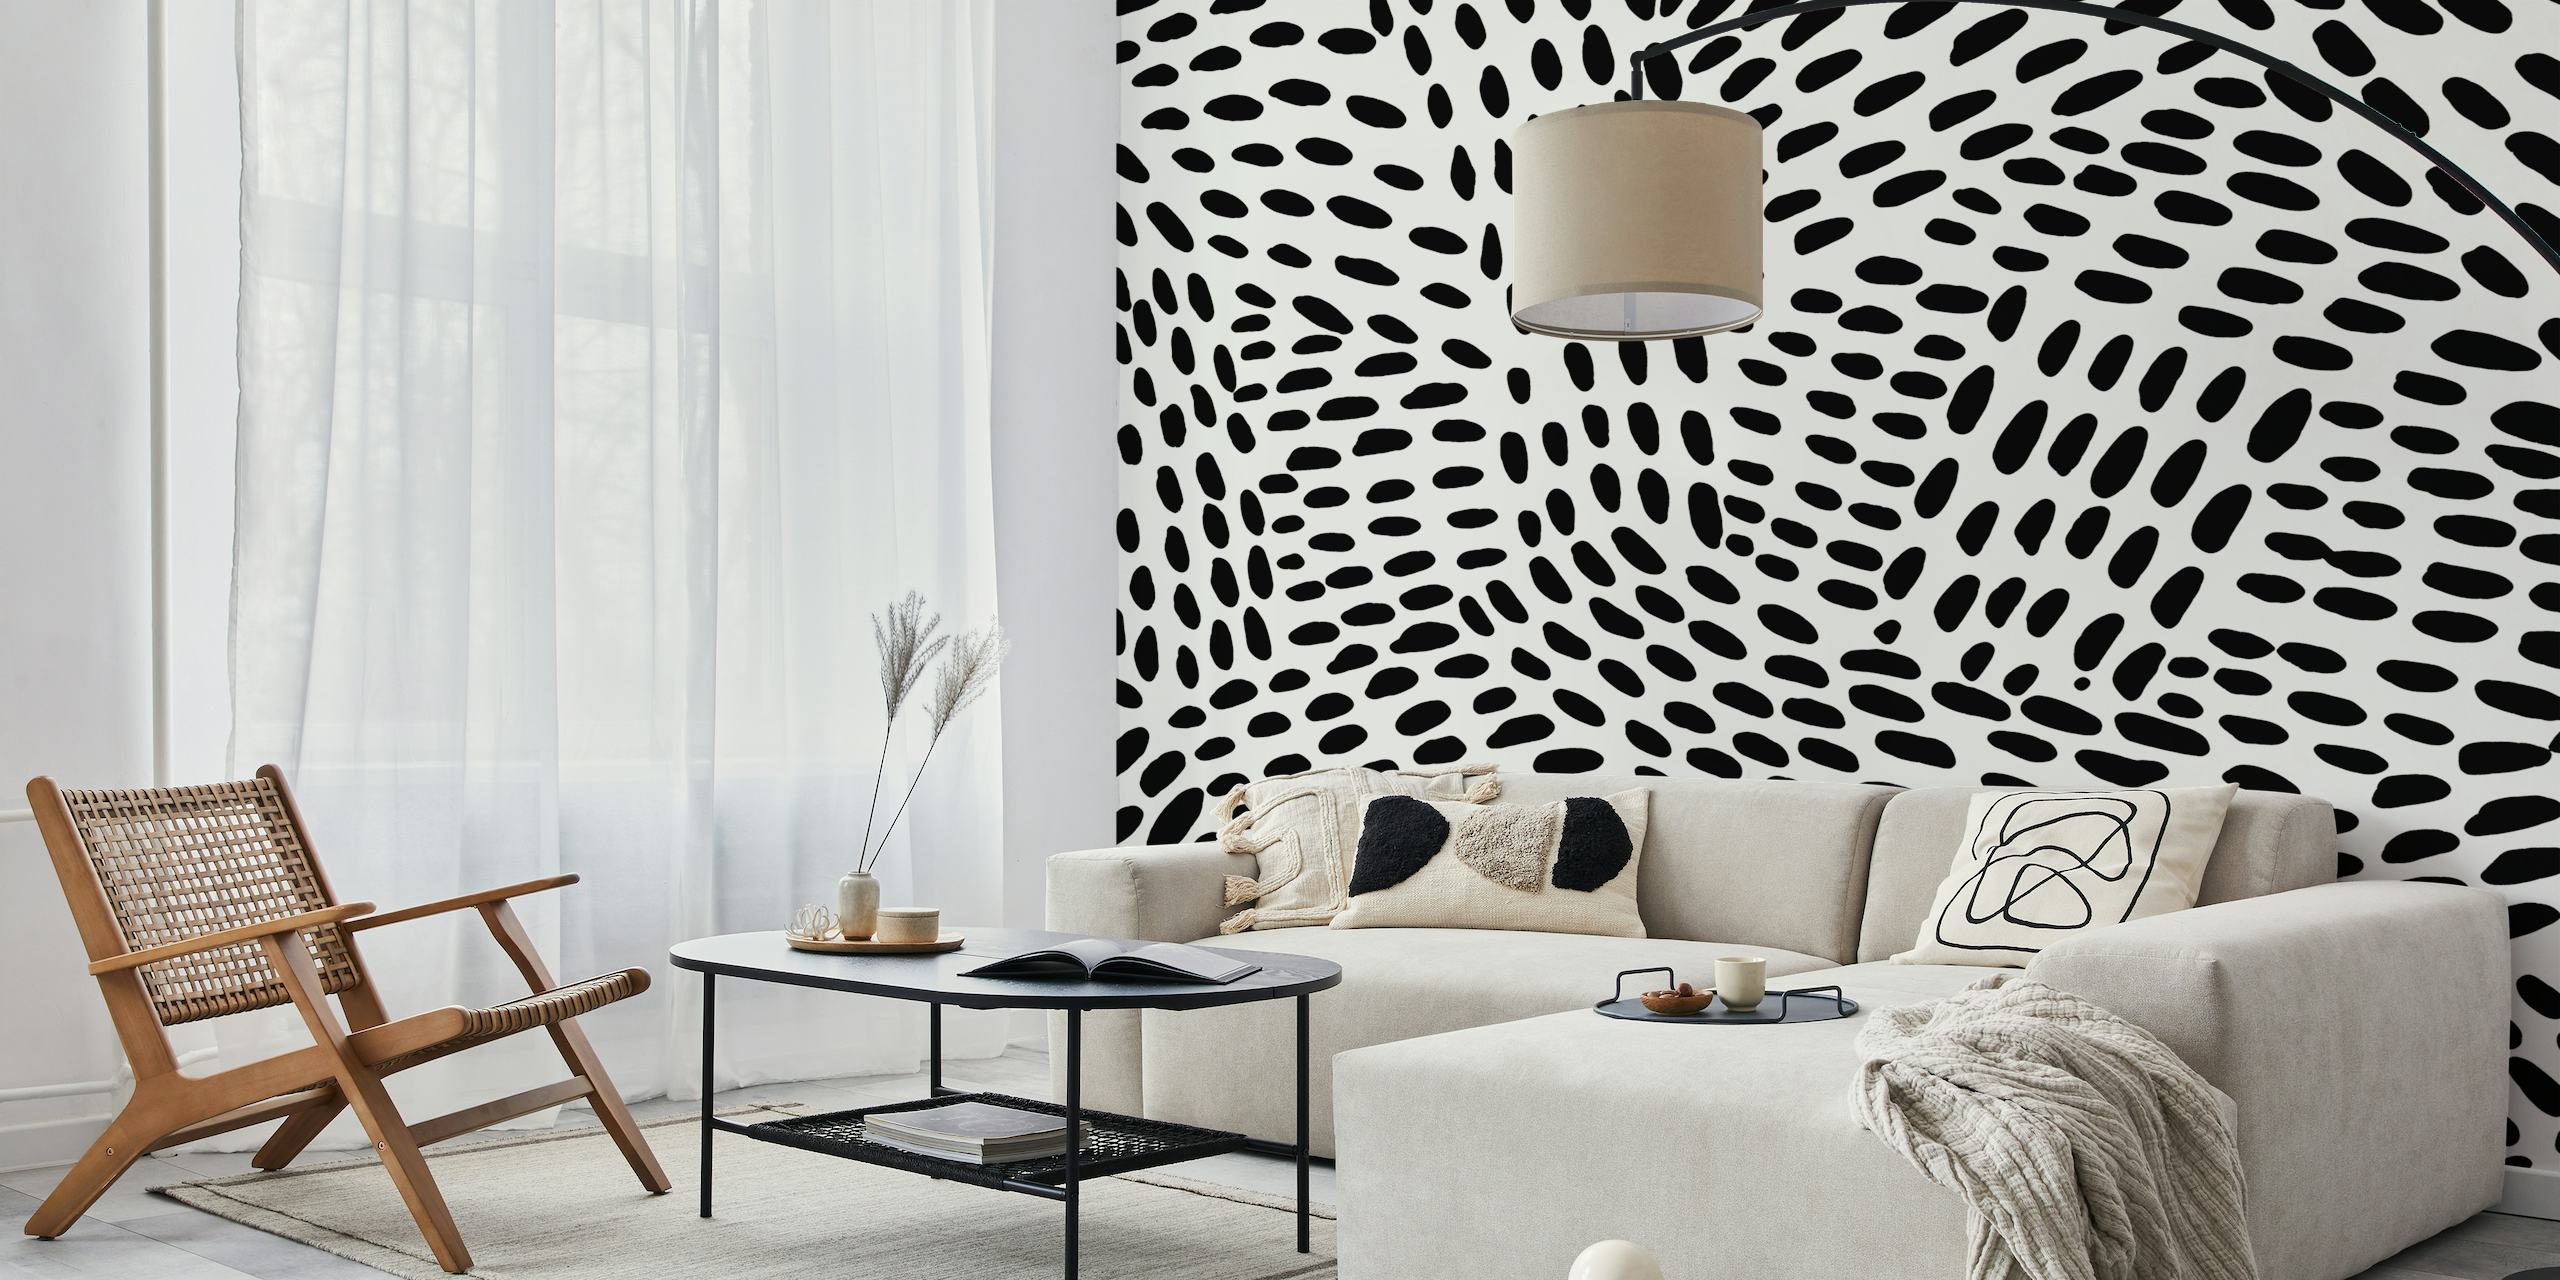 Black and white dotted lines wallpaper